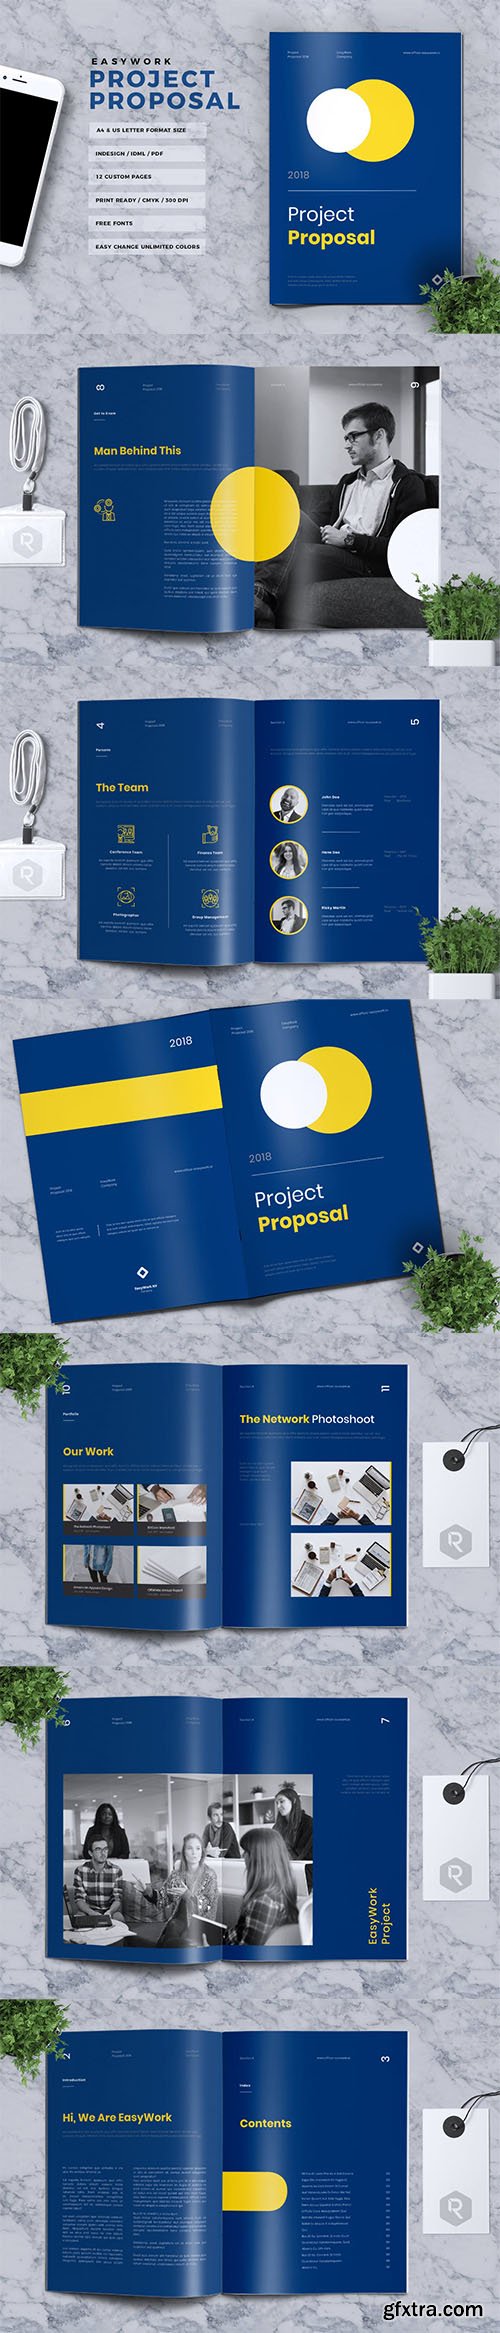 EASYWORK - Project Proposal